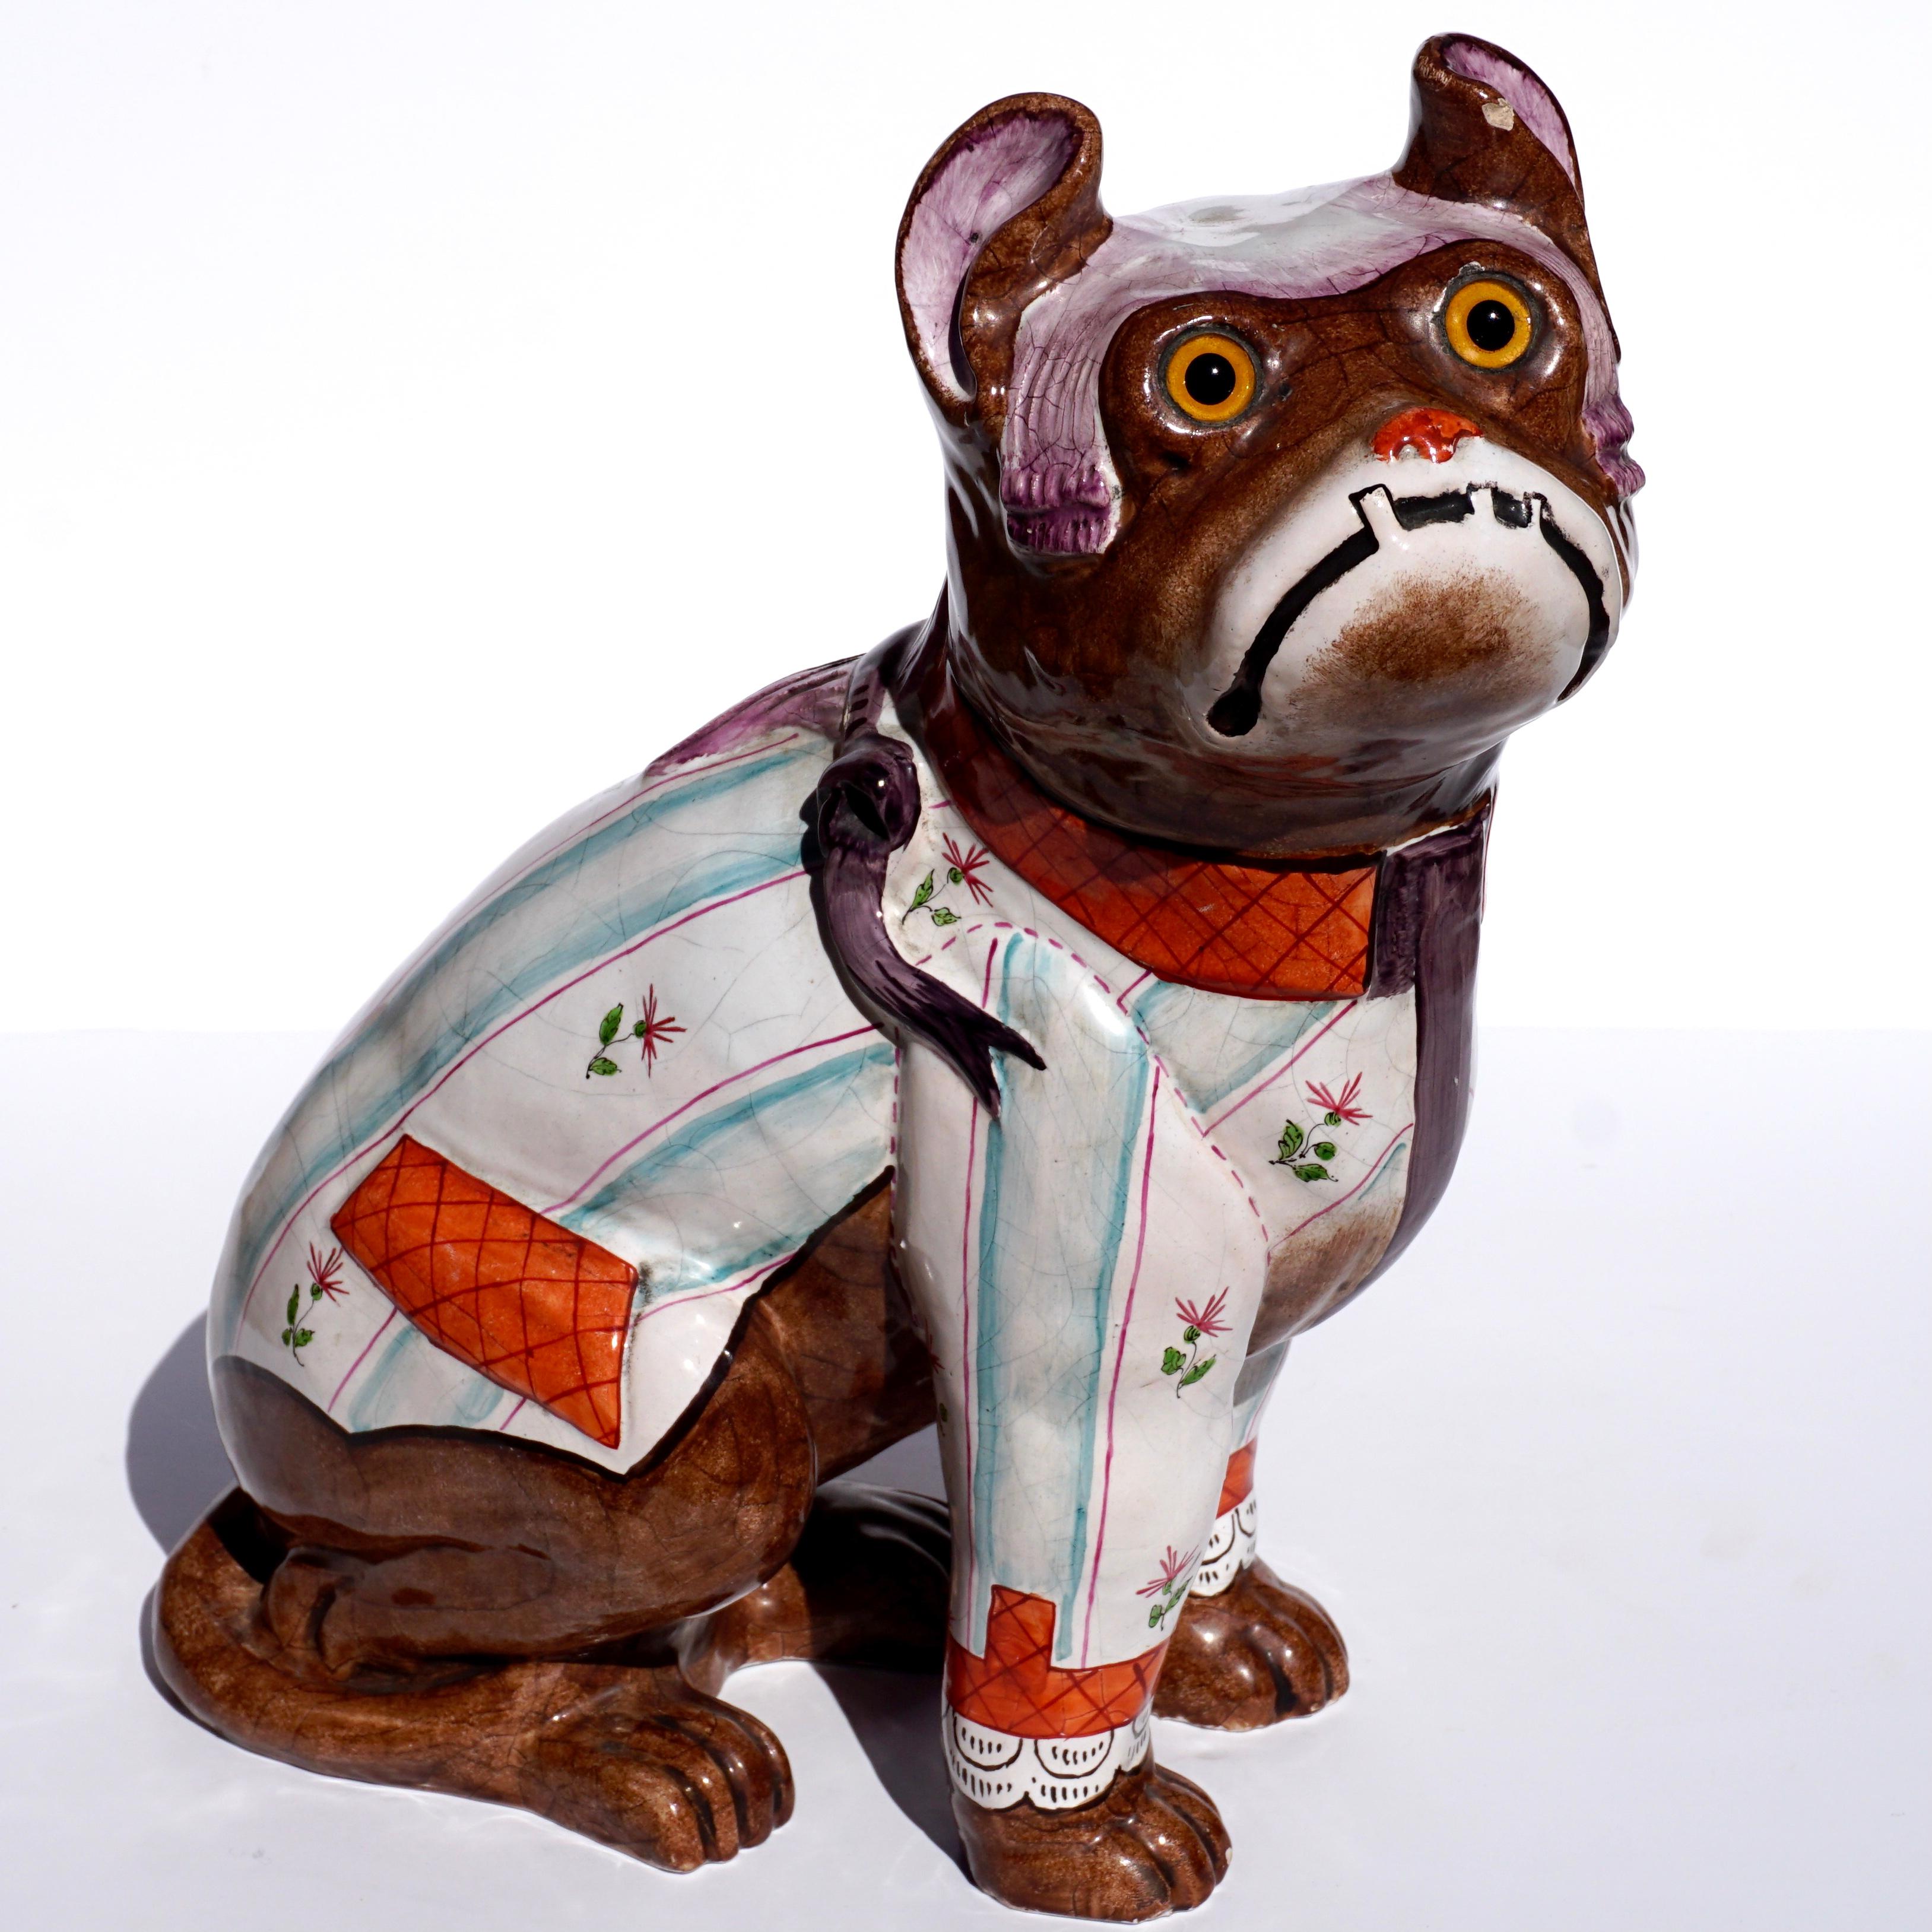 Emile Galle (1847 - 1904) Faience Tin Glazed Pottery Figure of A Dog.

A whimsical French bull dog dressed in a formal tail coat and political wig with signature Galle glass eyes. The coat stitched with a floral design on striped blue and white